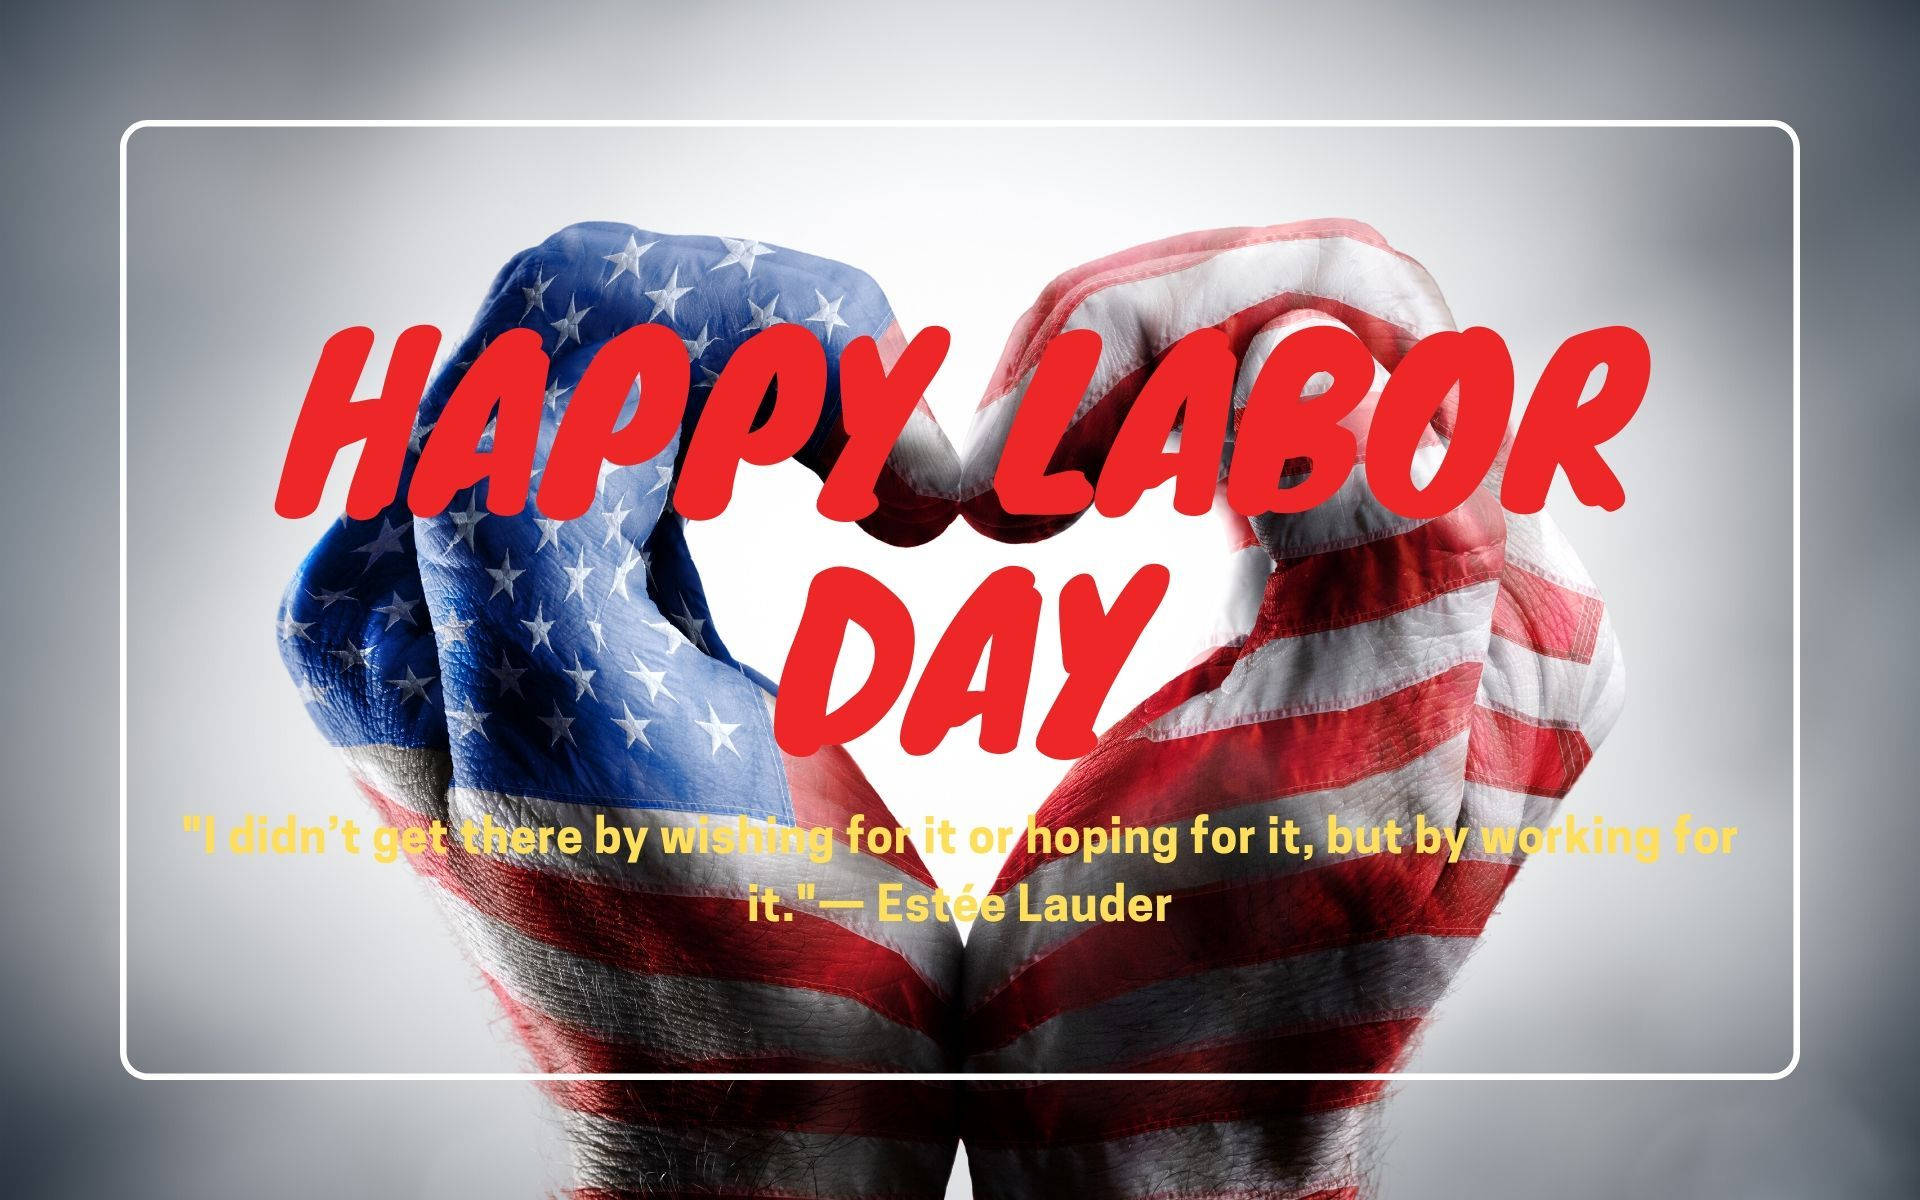 100 Labor Day Wallpapers  Wallpaperscom